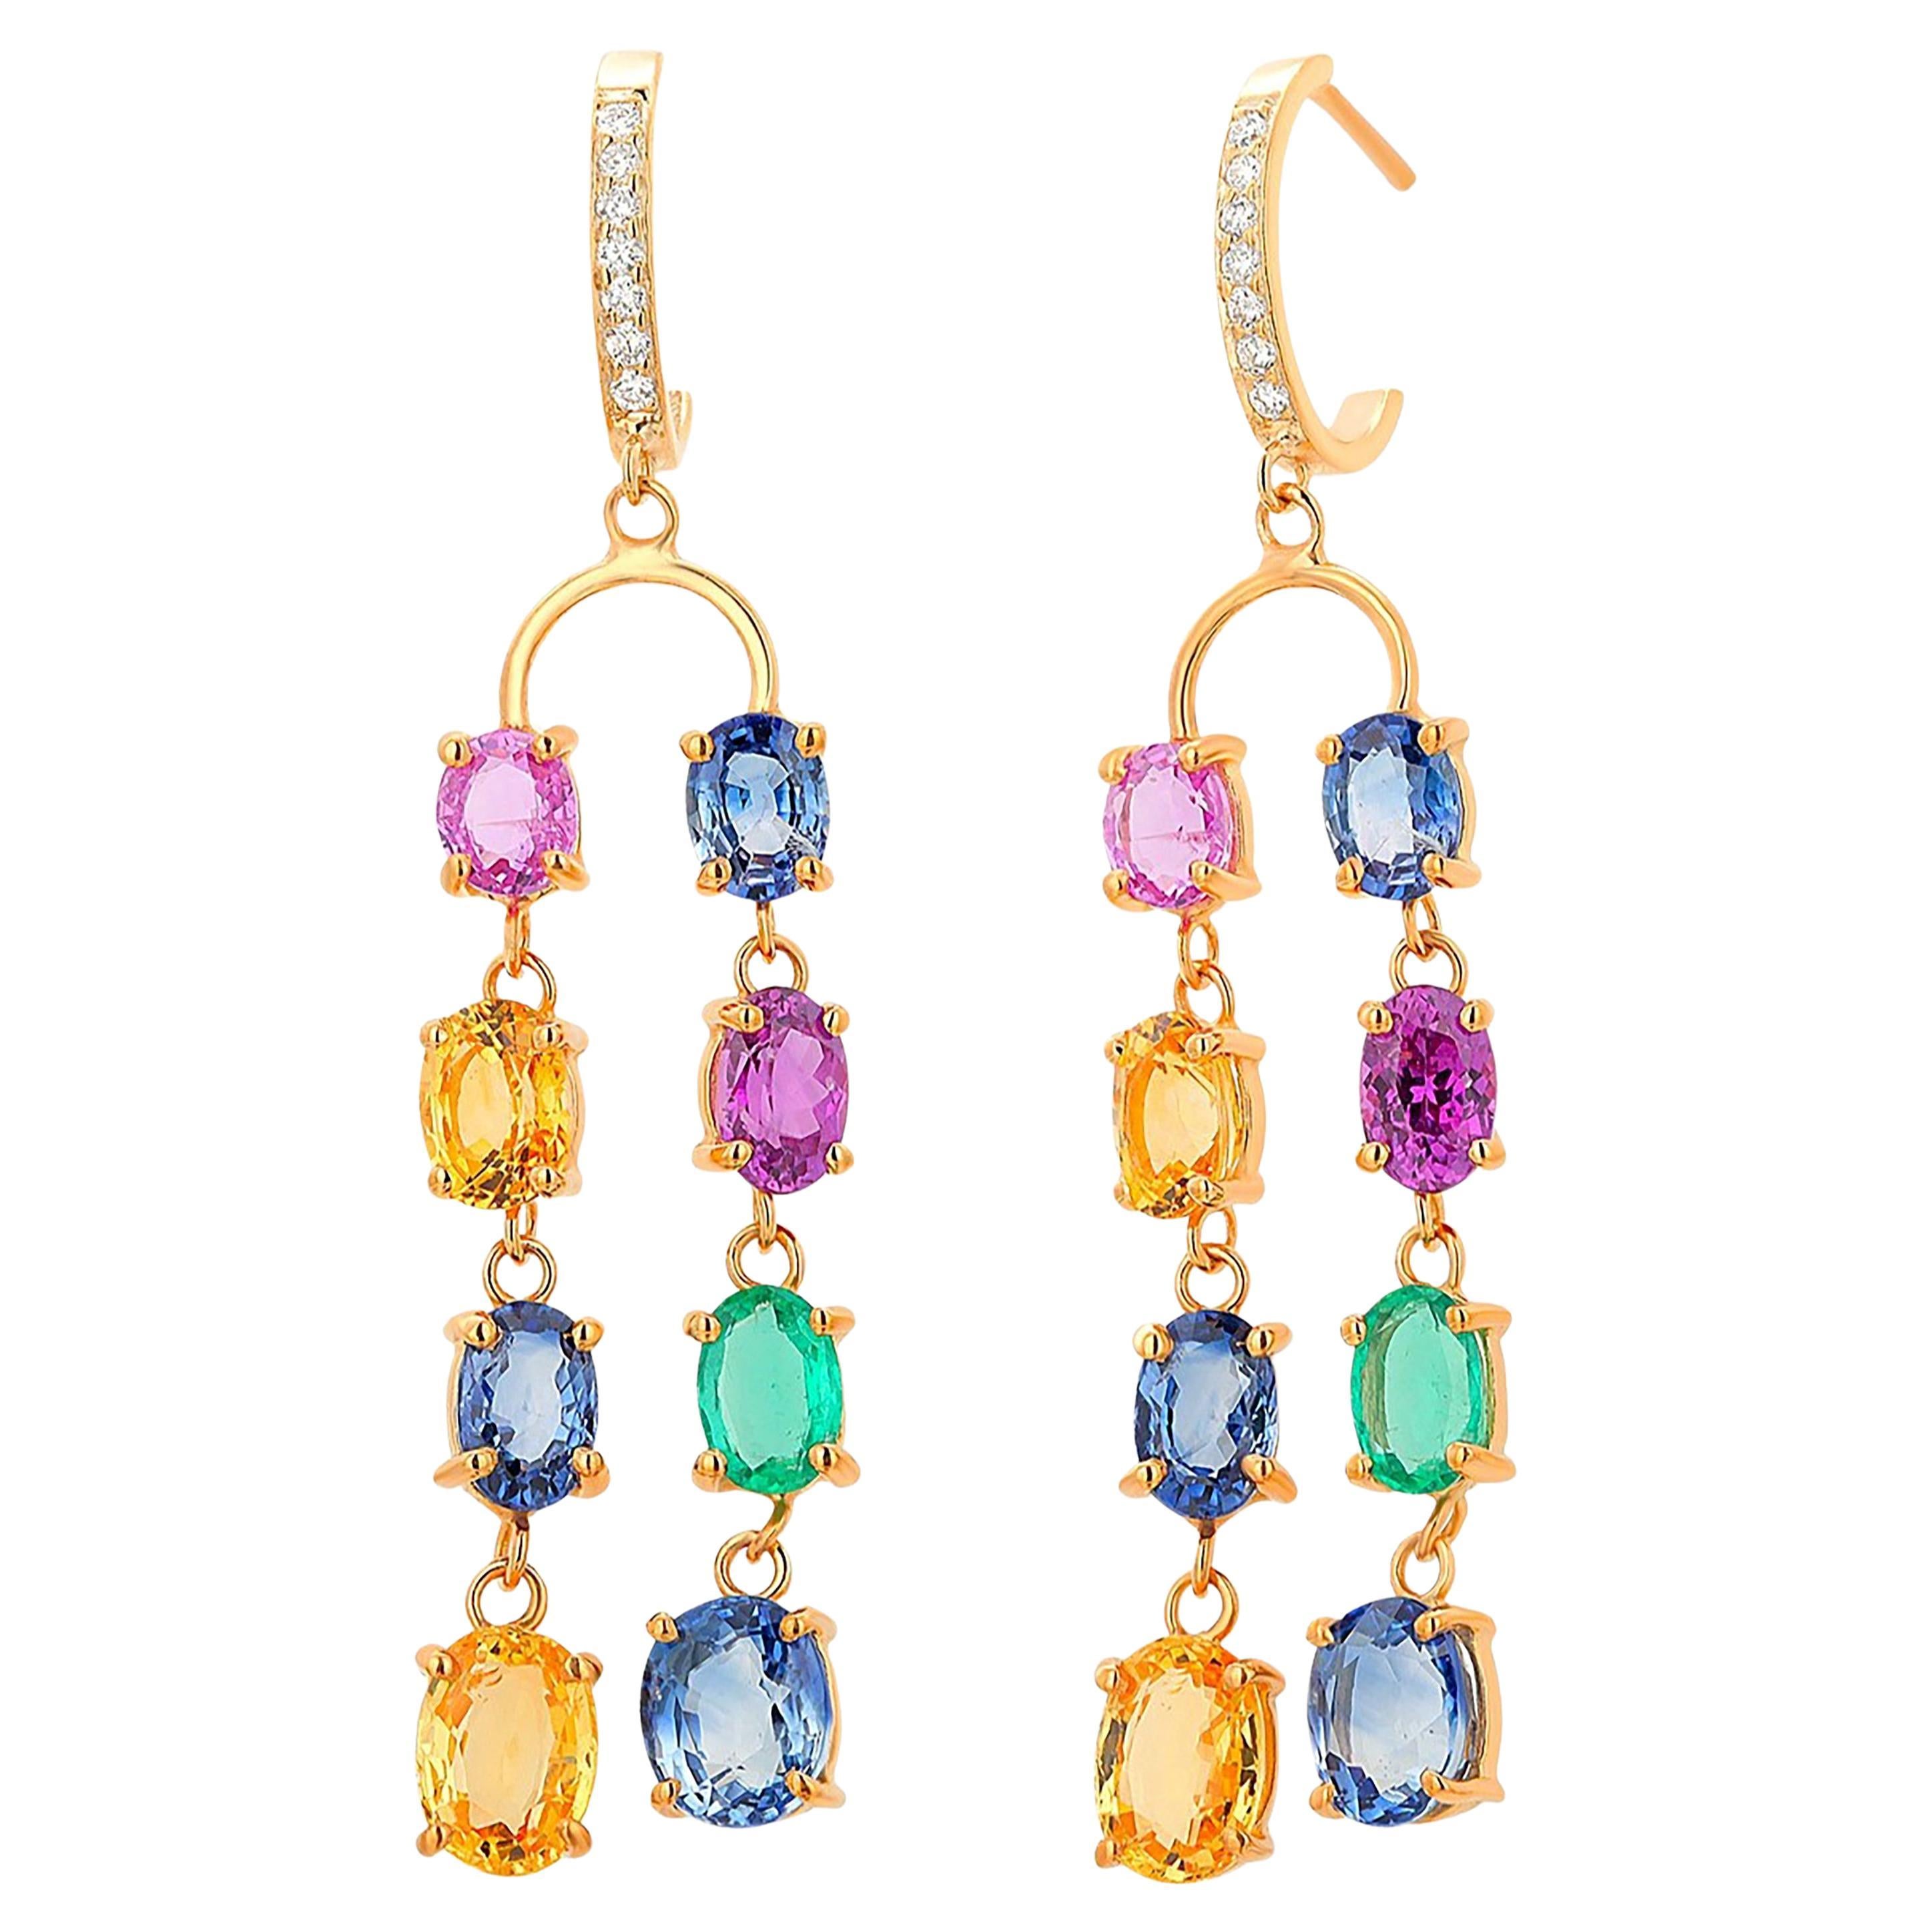 Double Lined Multi-Colorful Precious Stones 11.35 Carat 2 Inch Hoop Earrings For Sale